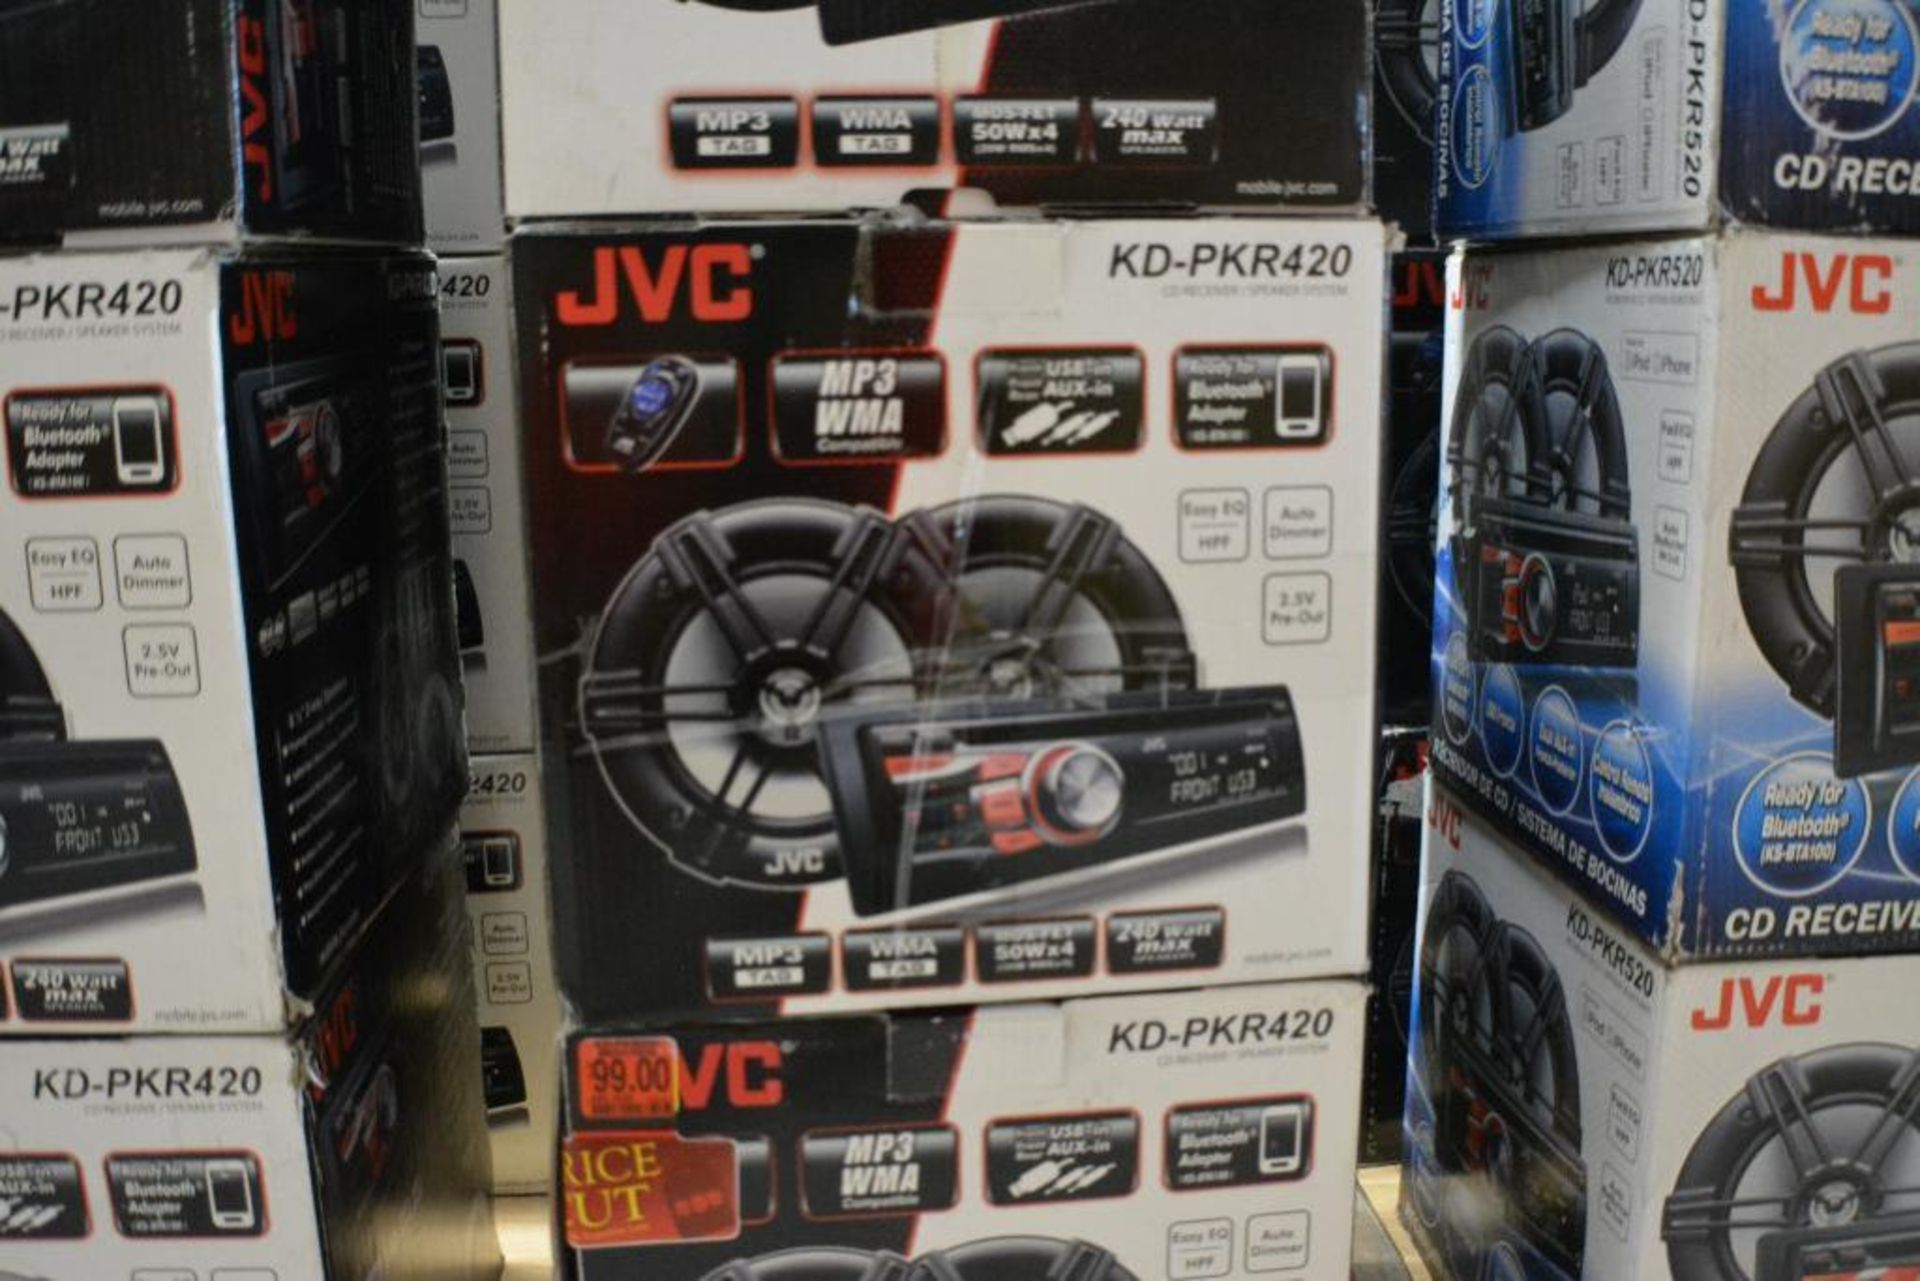 JVC Car Stereo Model KD-PKR420 In-Dash Receiver/Speaker System. MP3 WMA Compatible + Front/Rear USB/ - Image 5 of 5